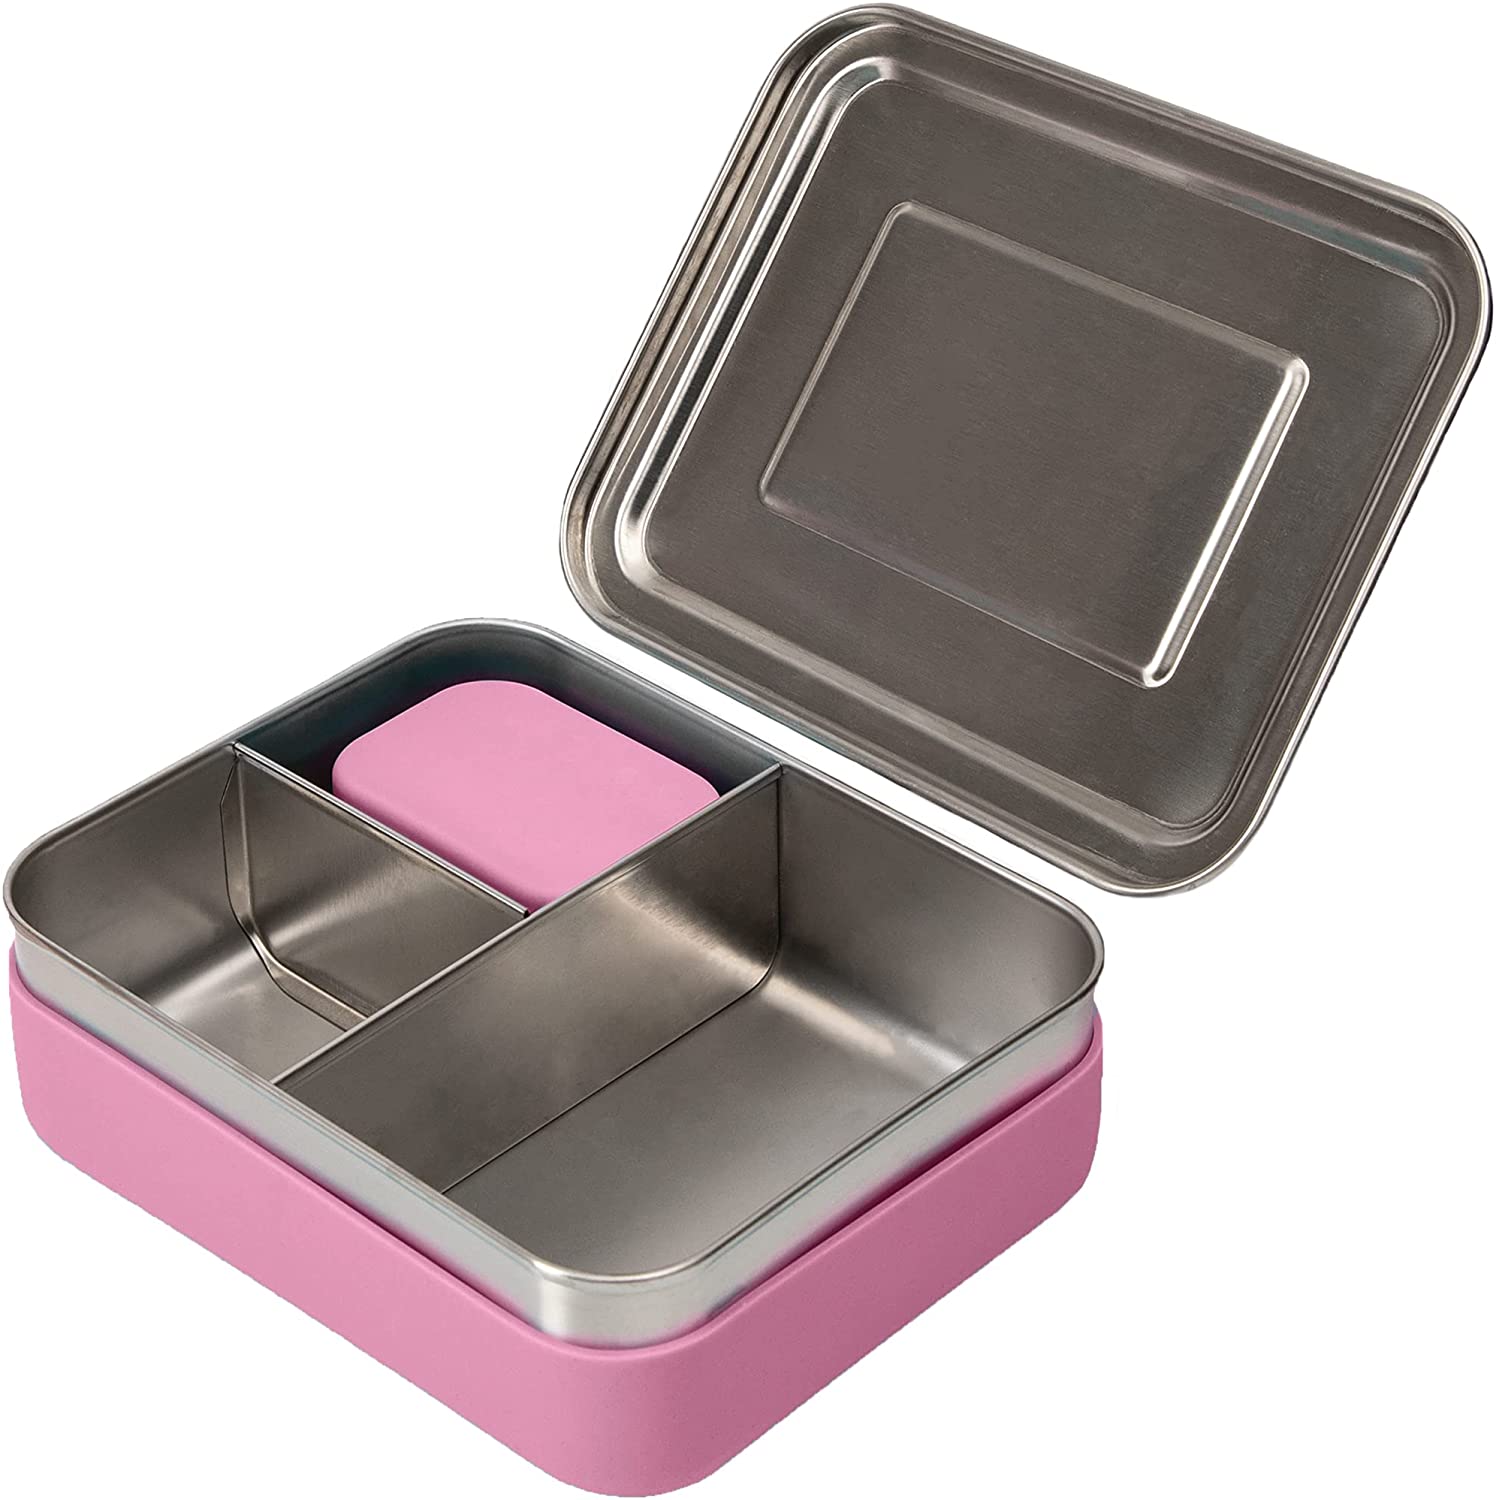 Aohea Portable Folding Bento Lunch Box with Stainless Steel